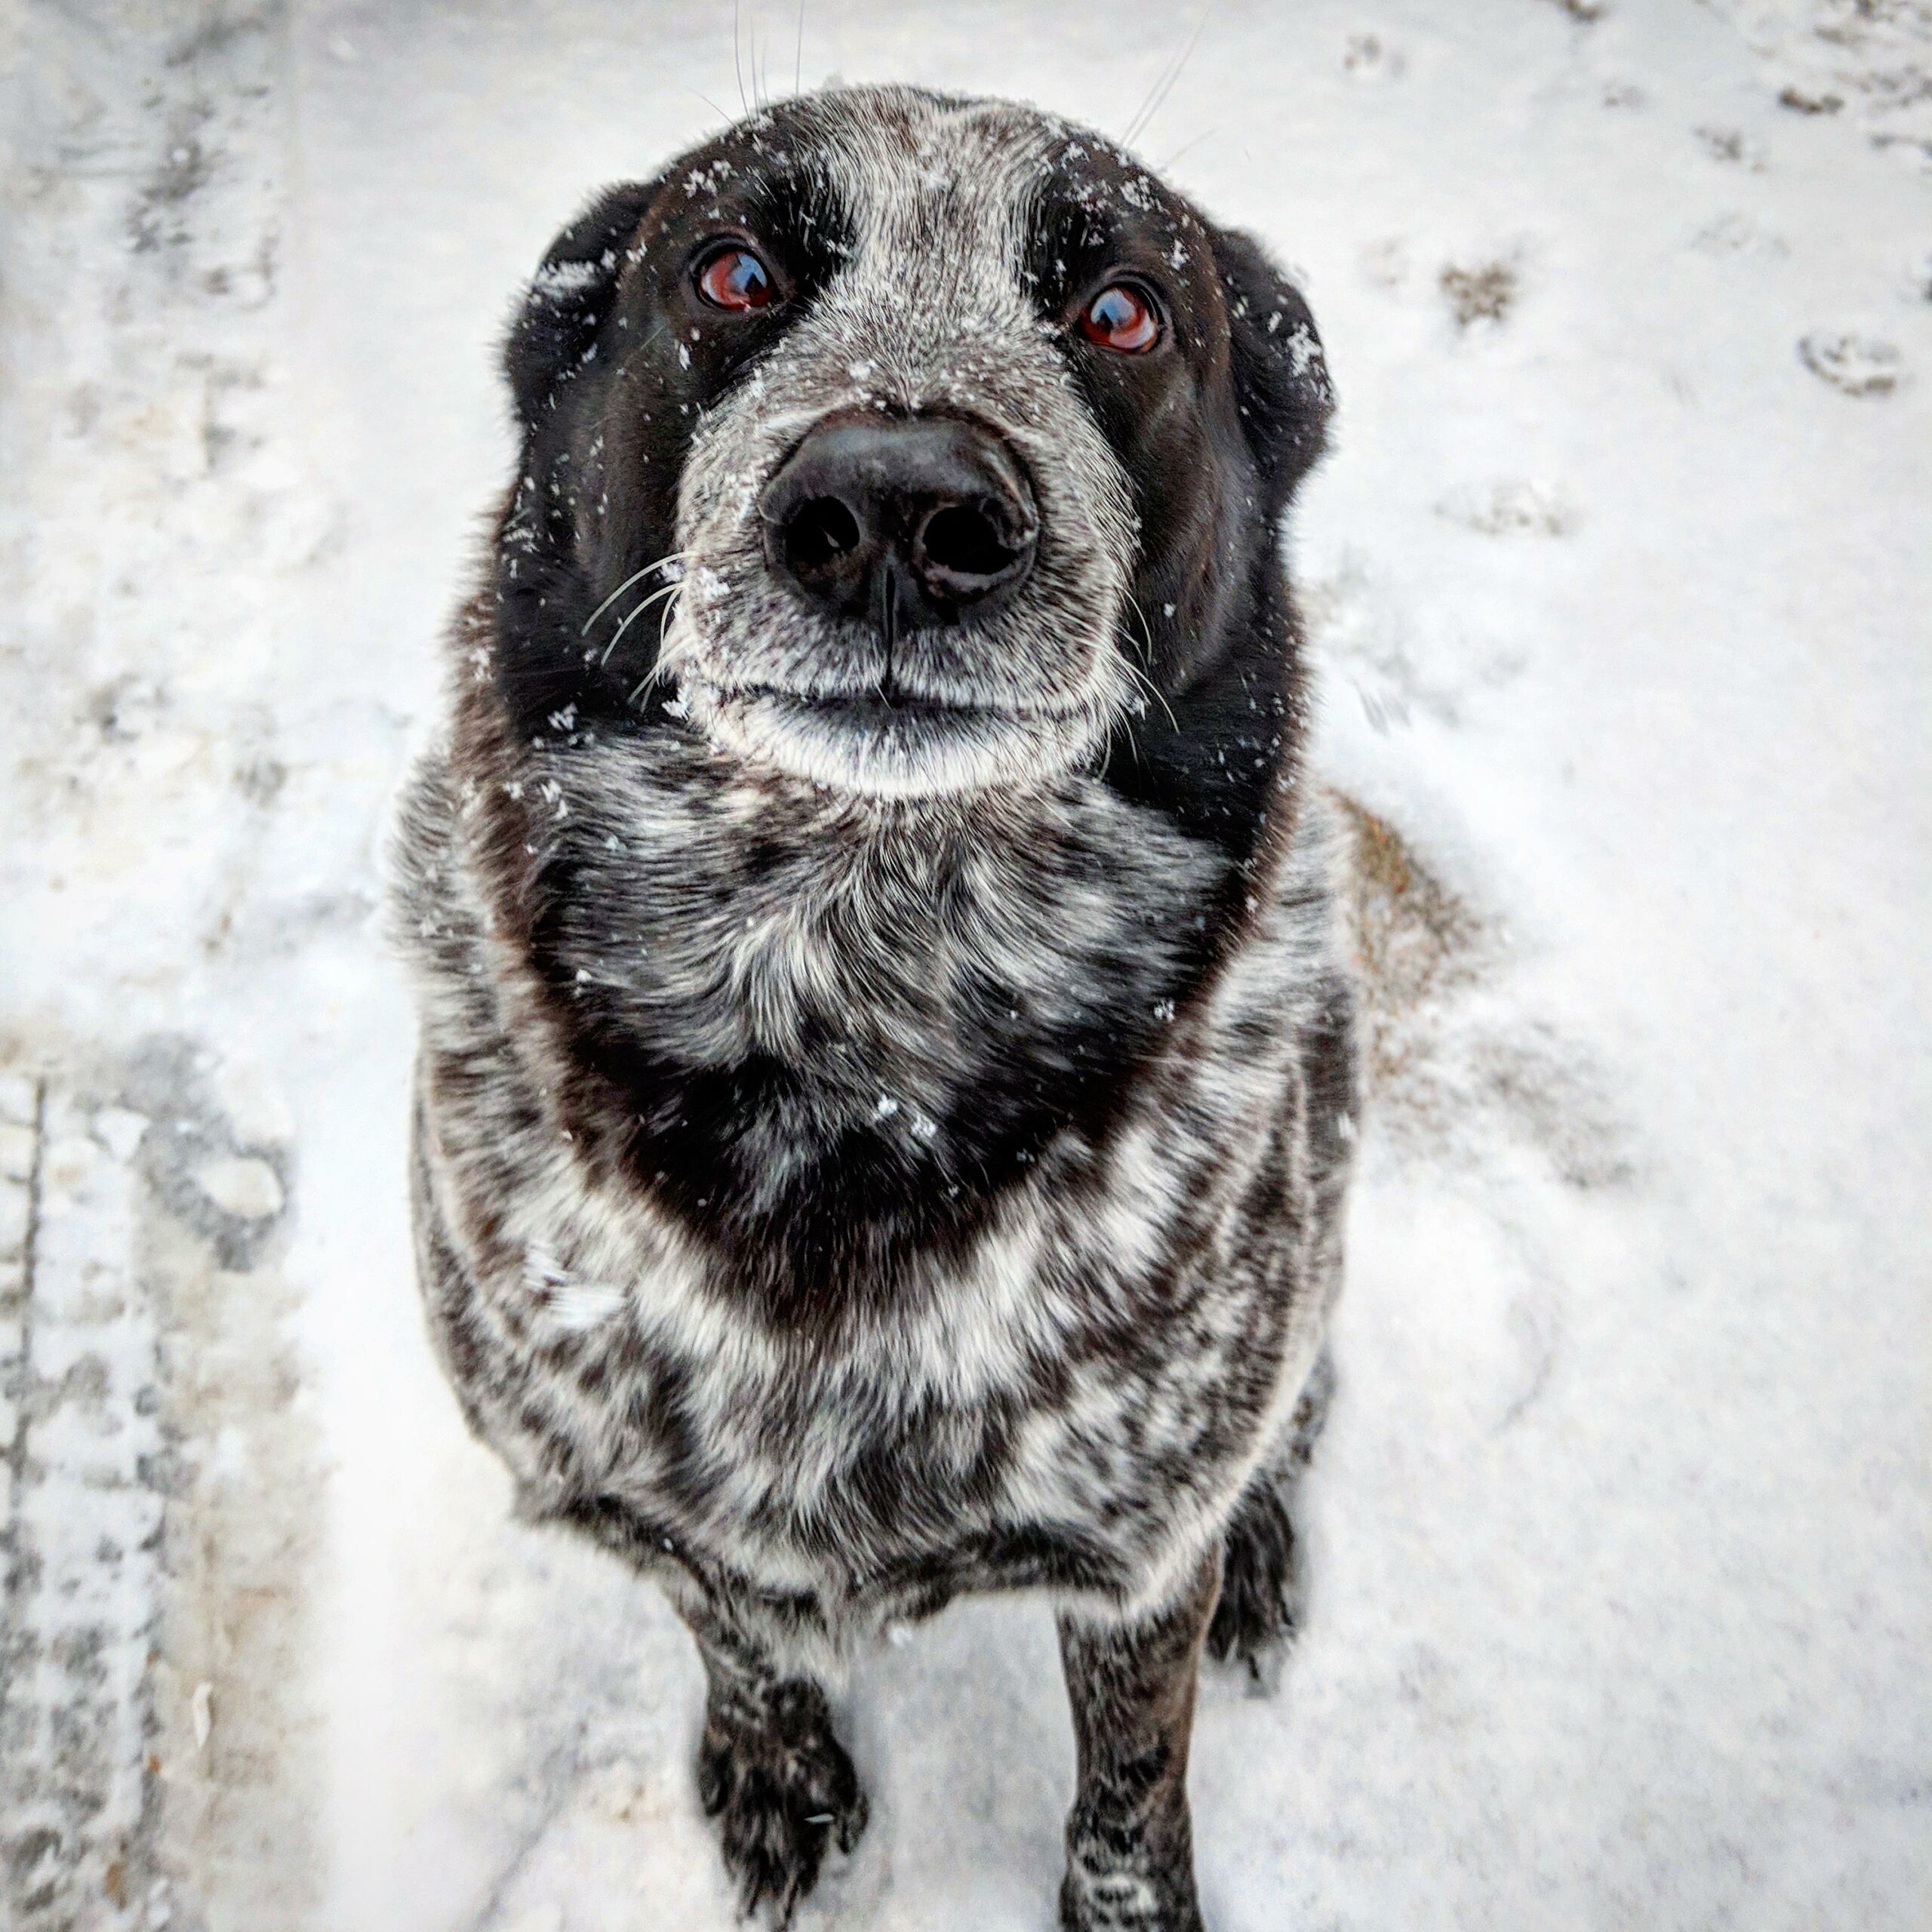 A black and white dog sits in the snow, looking up at the person taking the photo with puppy eyes.